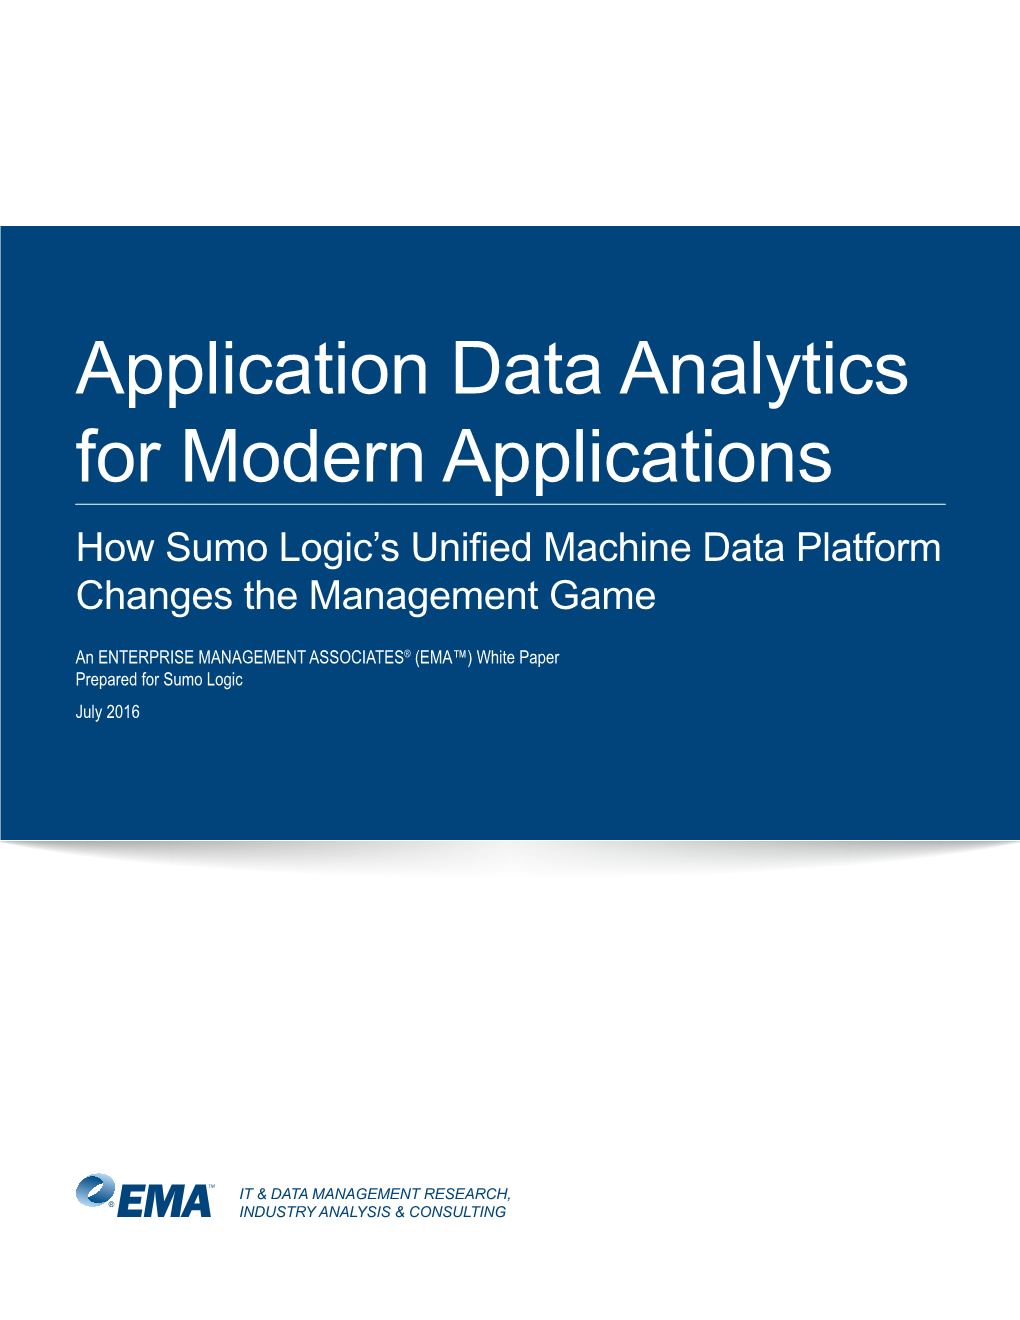 Application Data Analytics for Modern Applications How Sumo Logic’S Unified Machine Data Platform Changes the Management Game